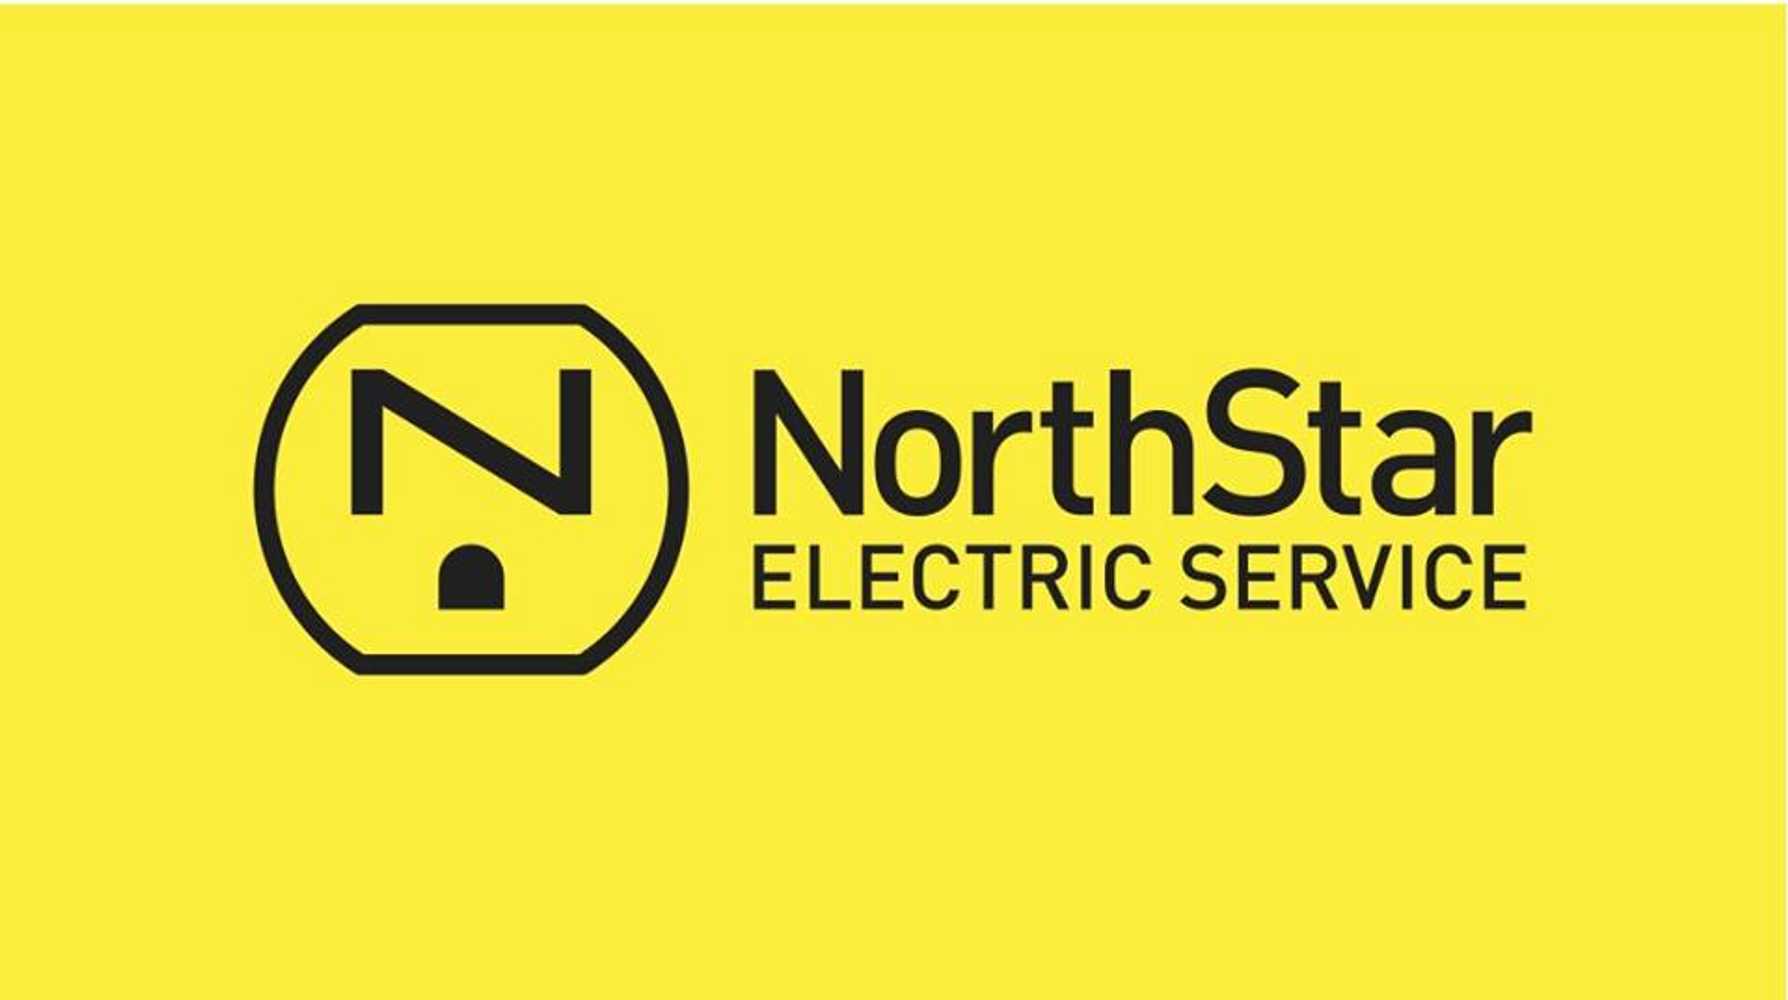 Photo(s) from Northstar Electric Service